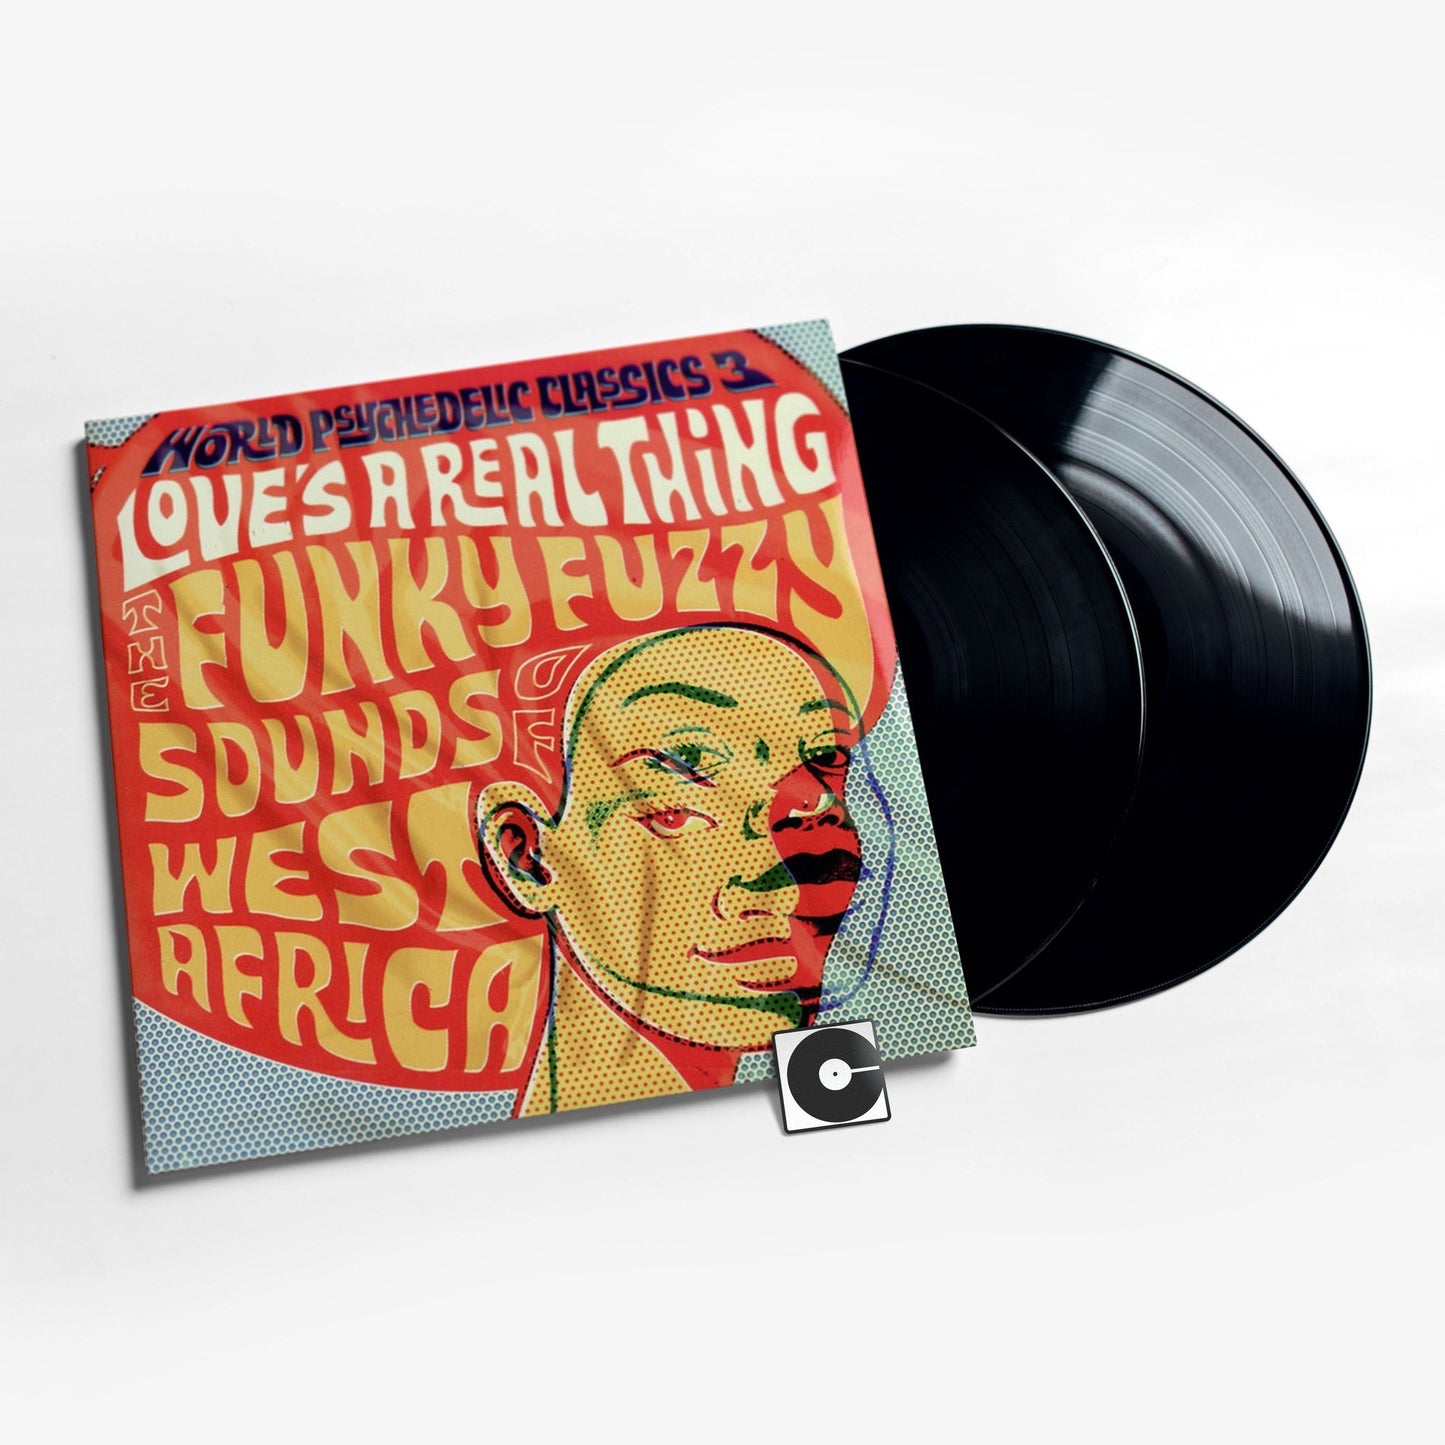 Various Artists - "World's Psychedelic Classics 3: Love's A Real Thing"